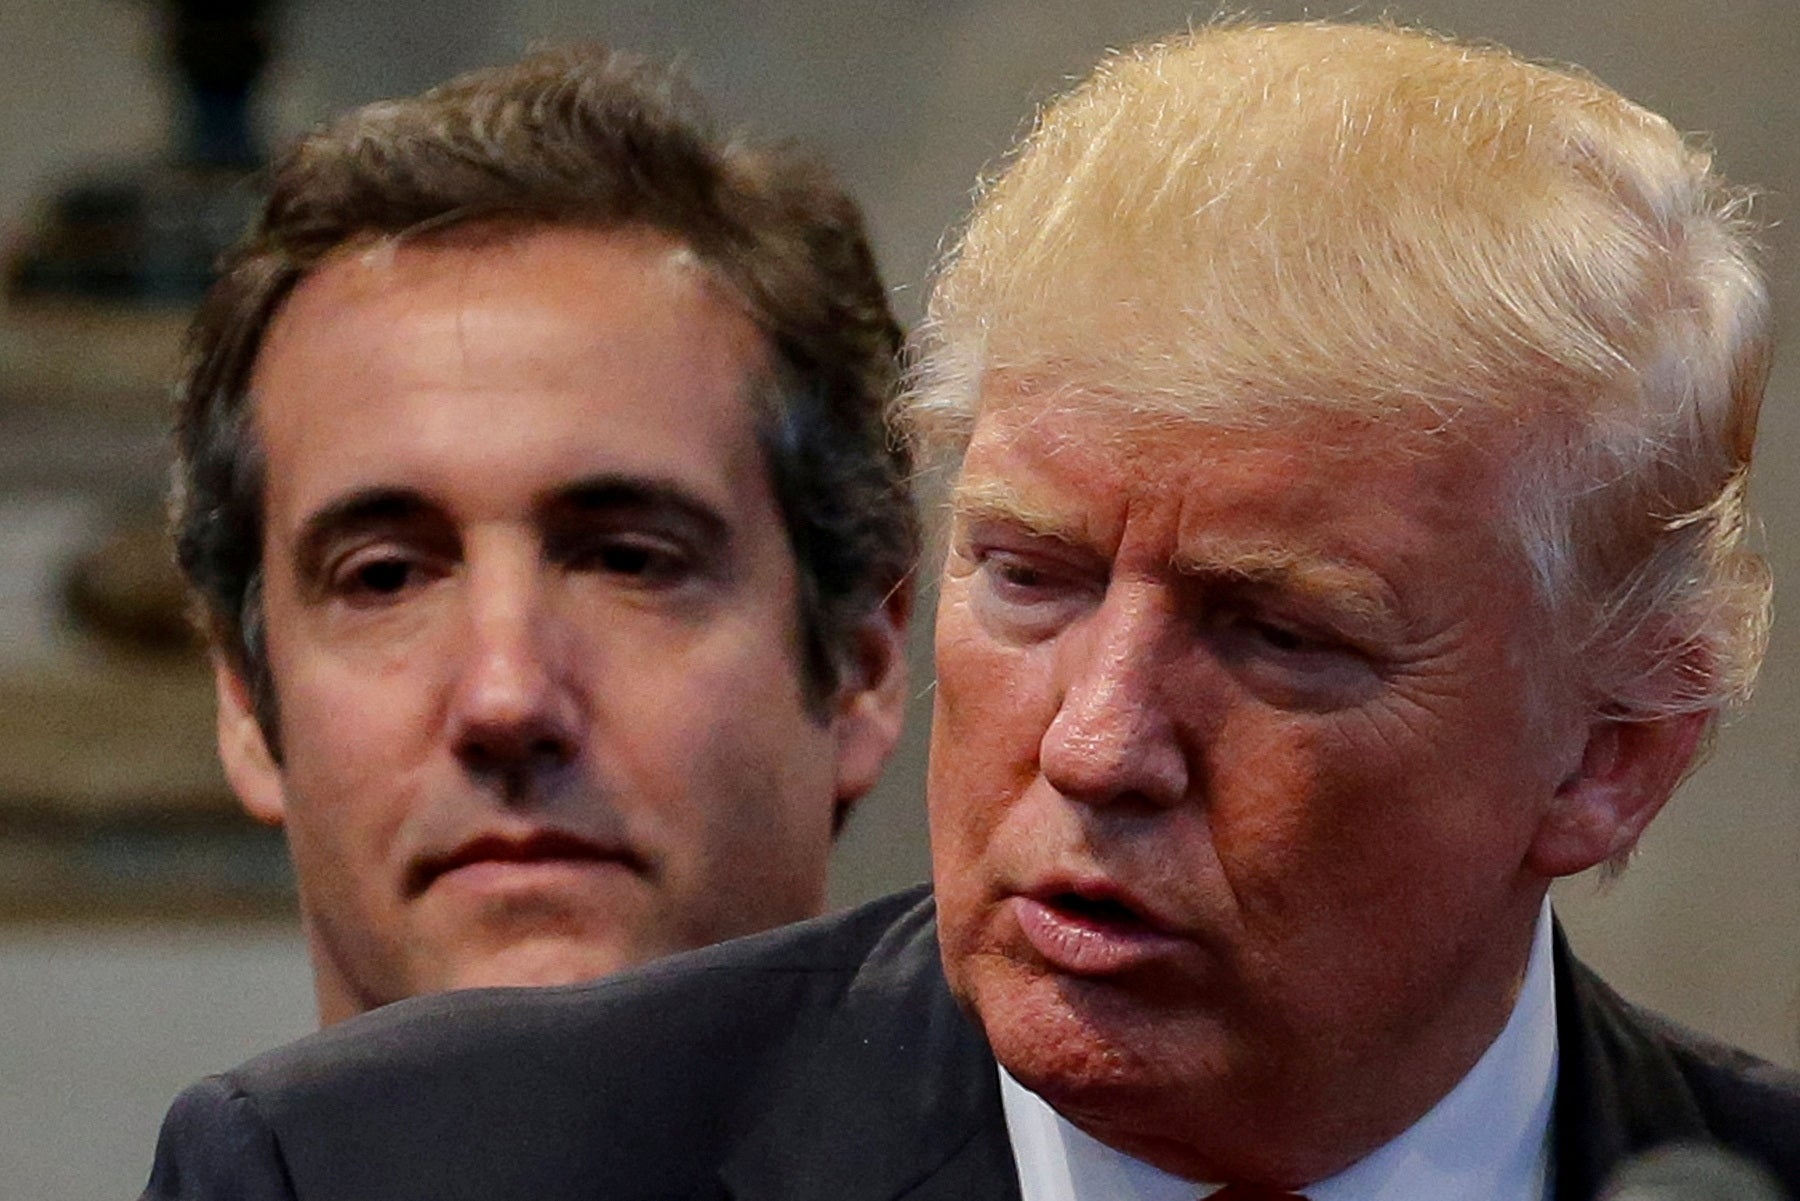 michael cohen was trump’s consummate inside man. now, friends say he’s on the stand and at risk